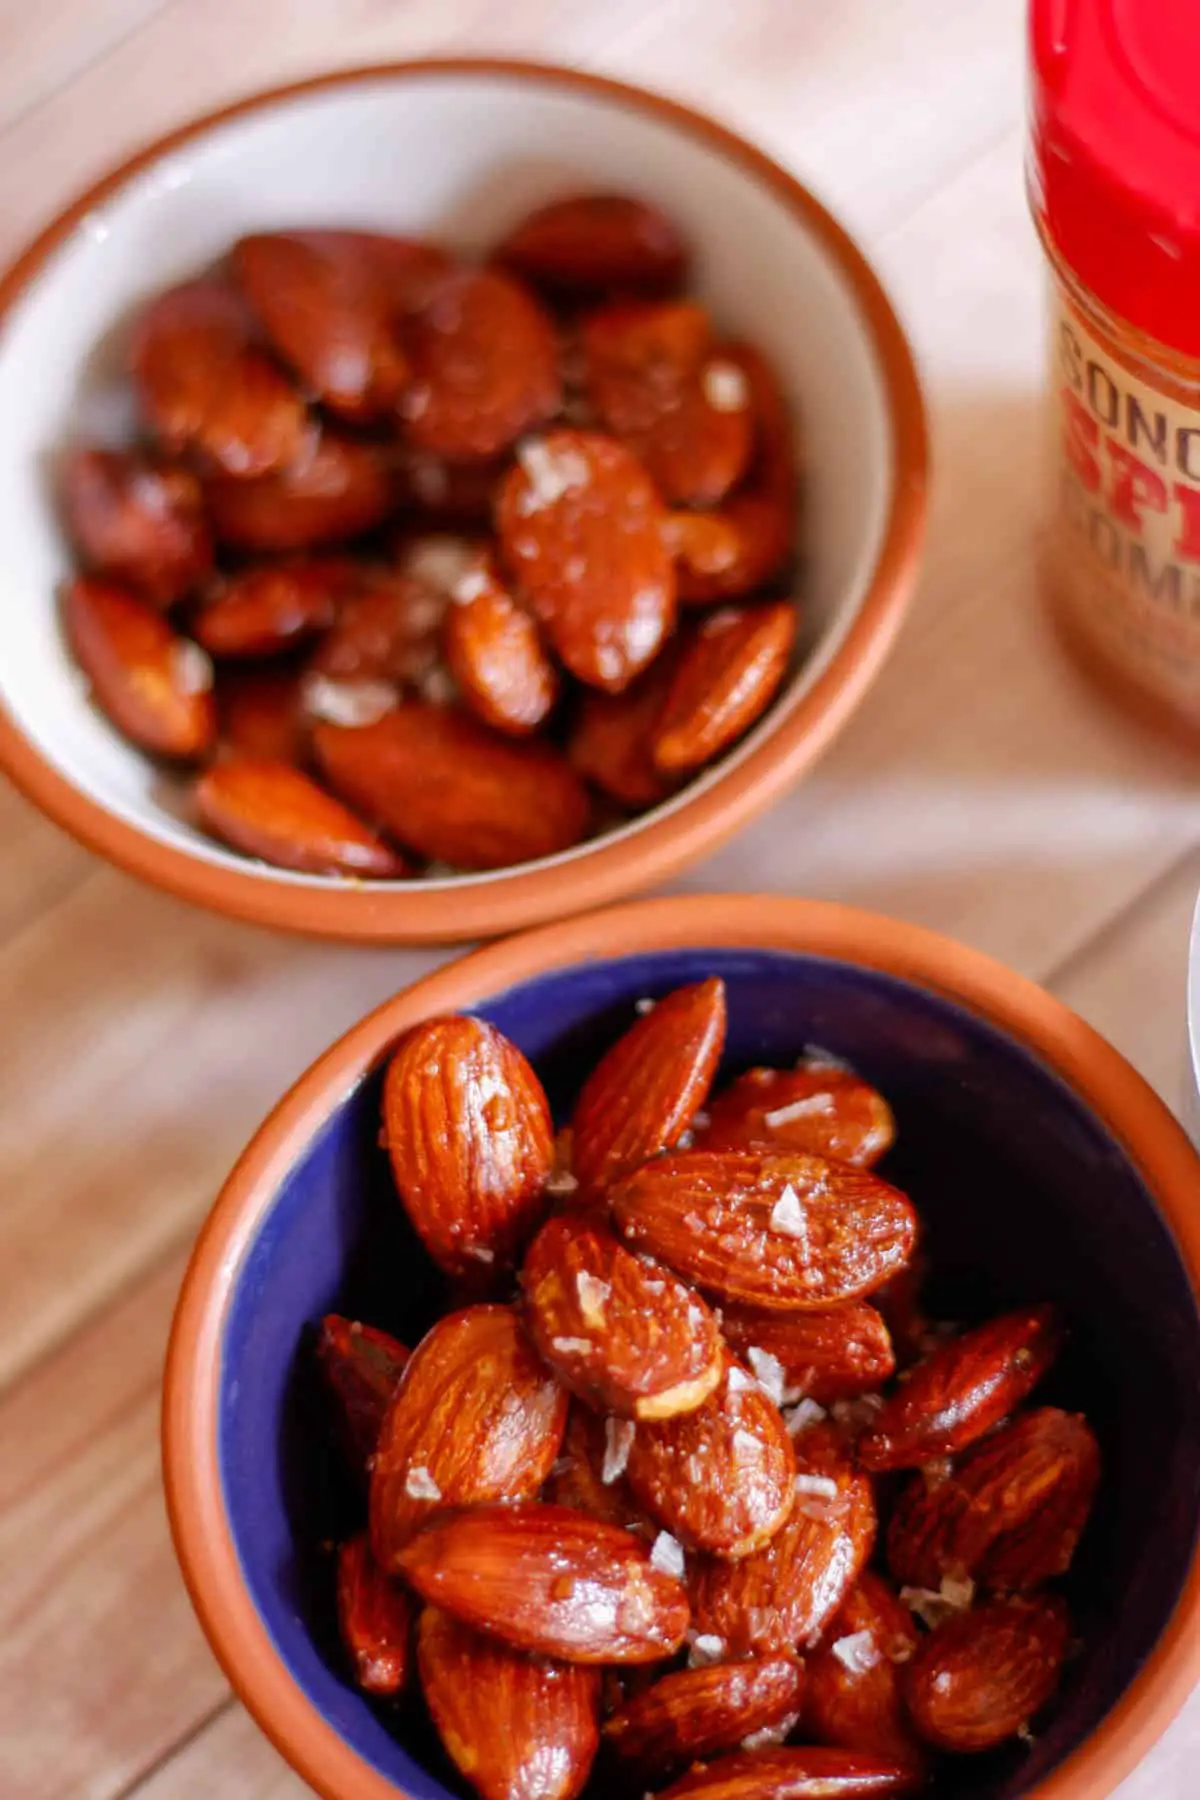 Small bowls filled with roasted almonds garnished with sea salt flakes, and bottle of Carolina Reaper powder on the side.